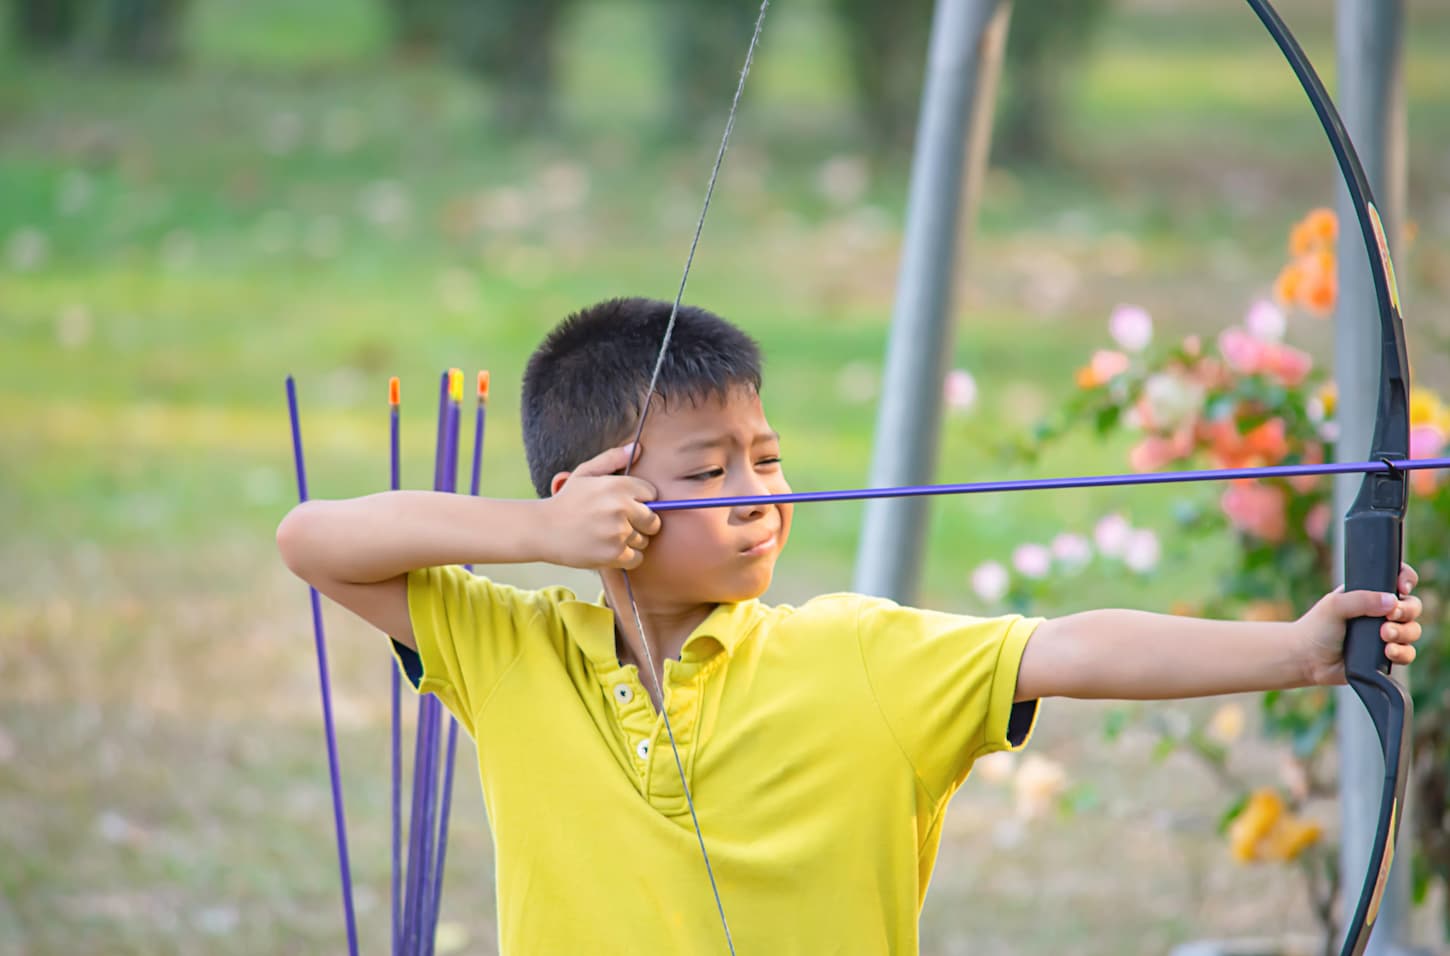 An image of an Asian boy doing archery in camp adventure.